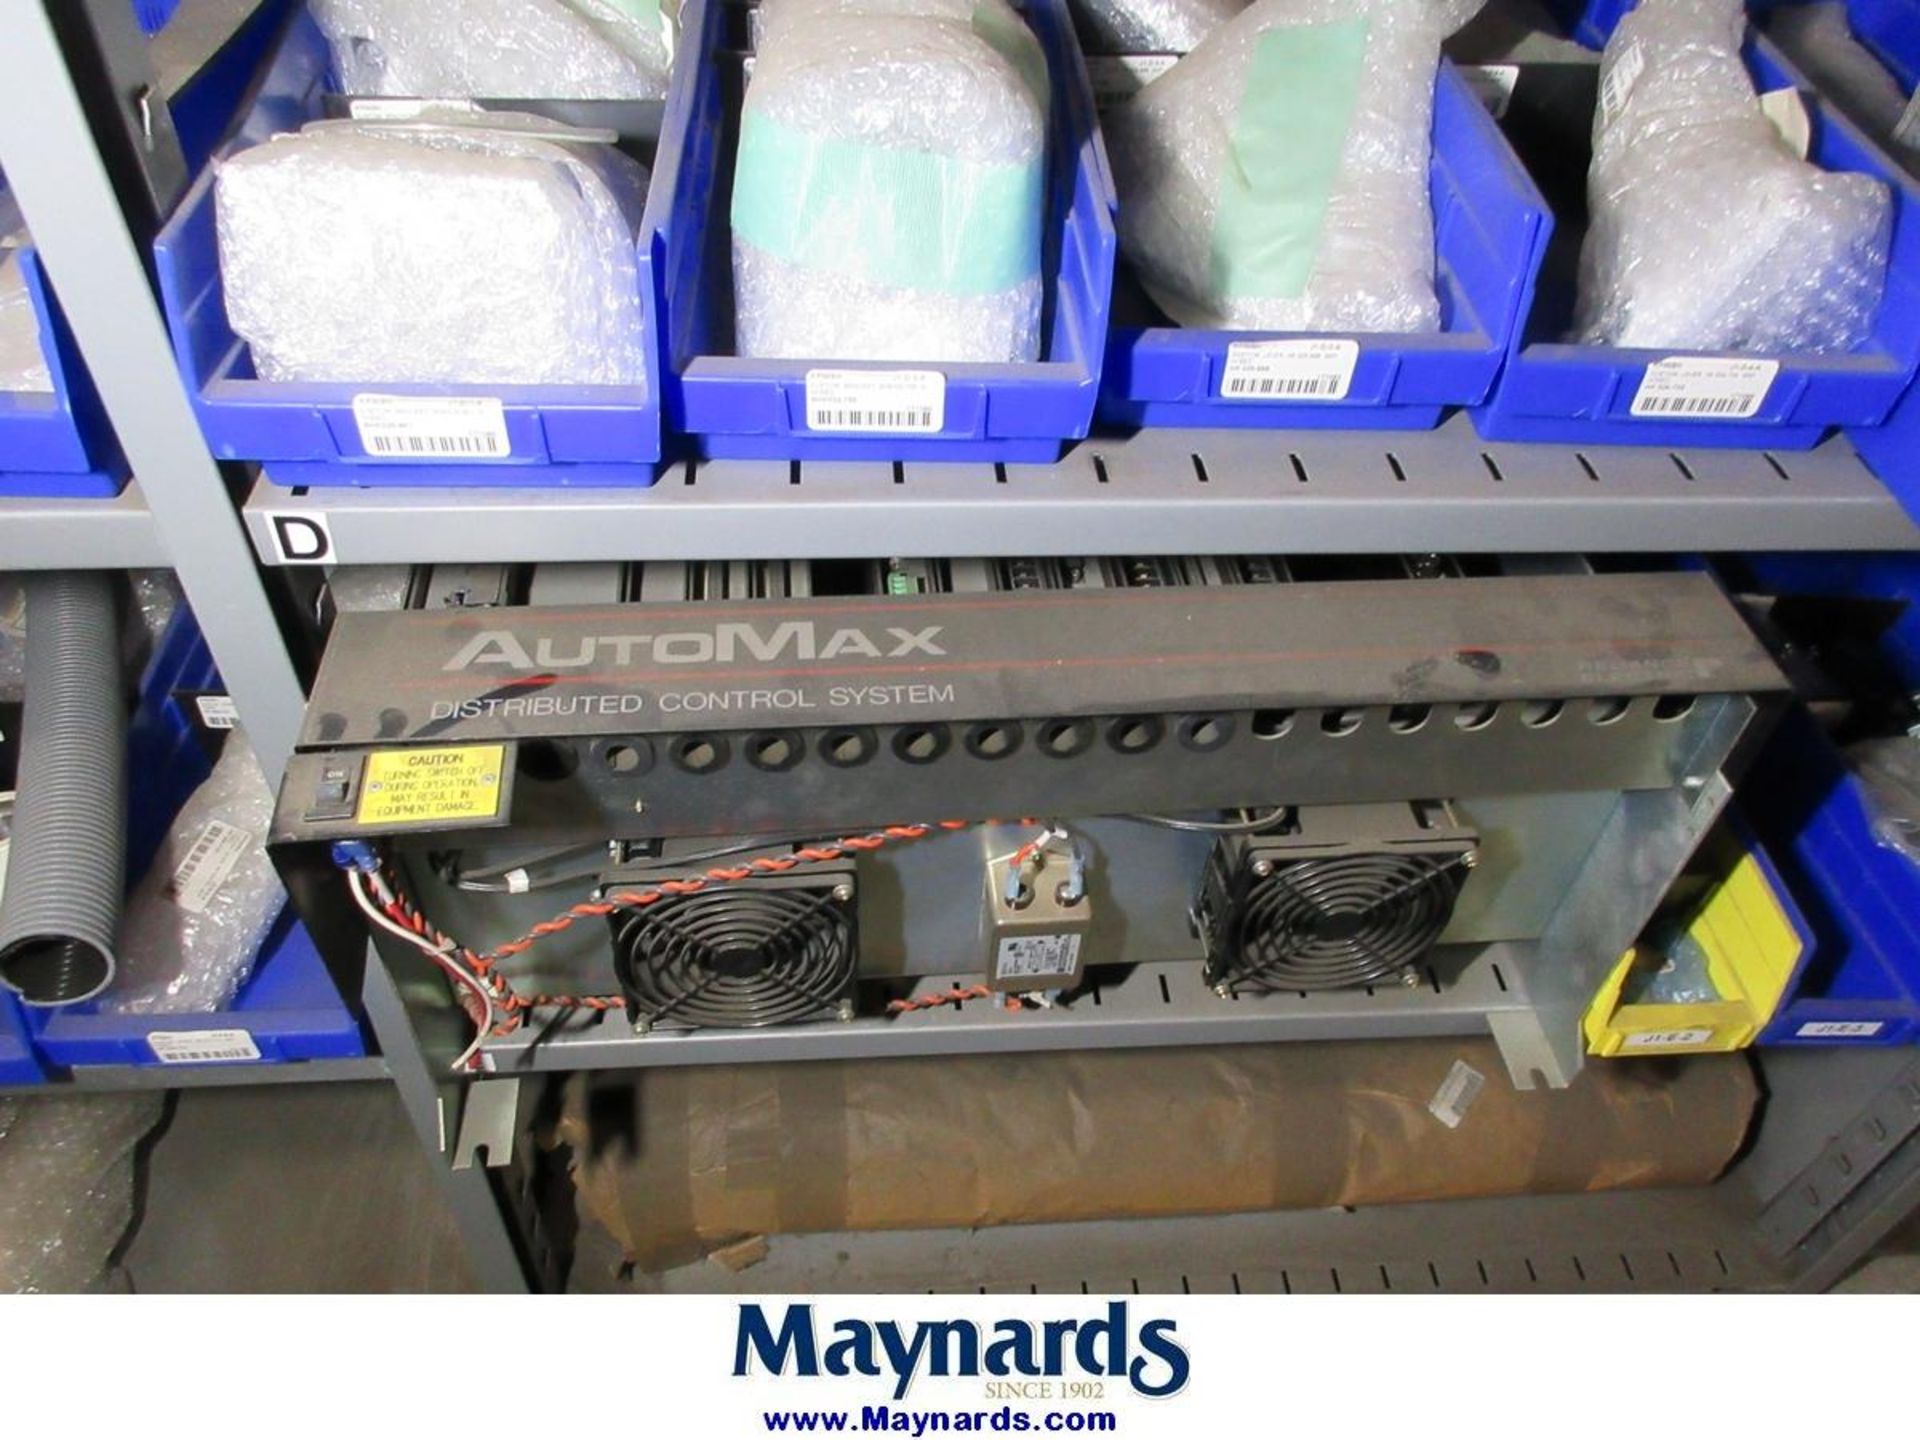 Large Lot of Electrical Controls, PLC's, Drives & Remaining Contents of Maint. Parts Crib - Image 34 of 107